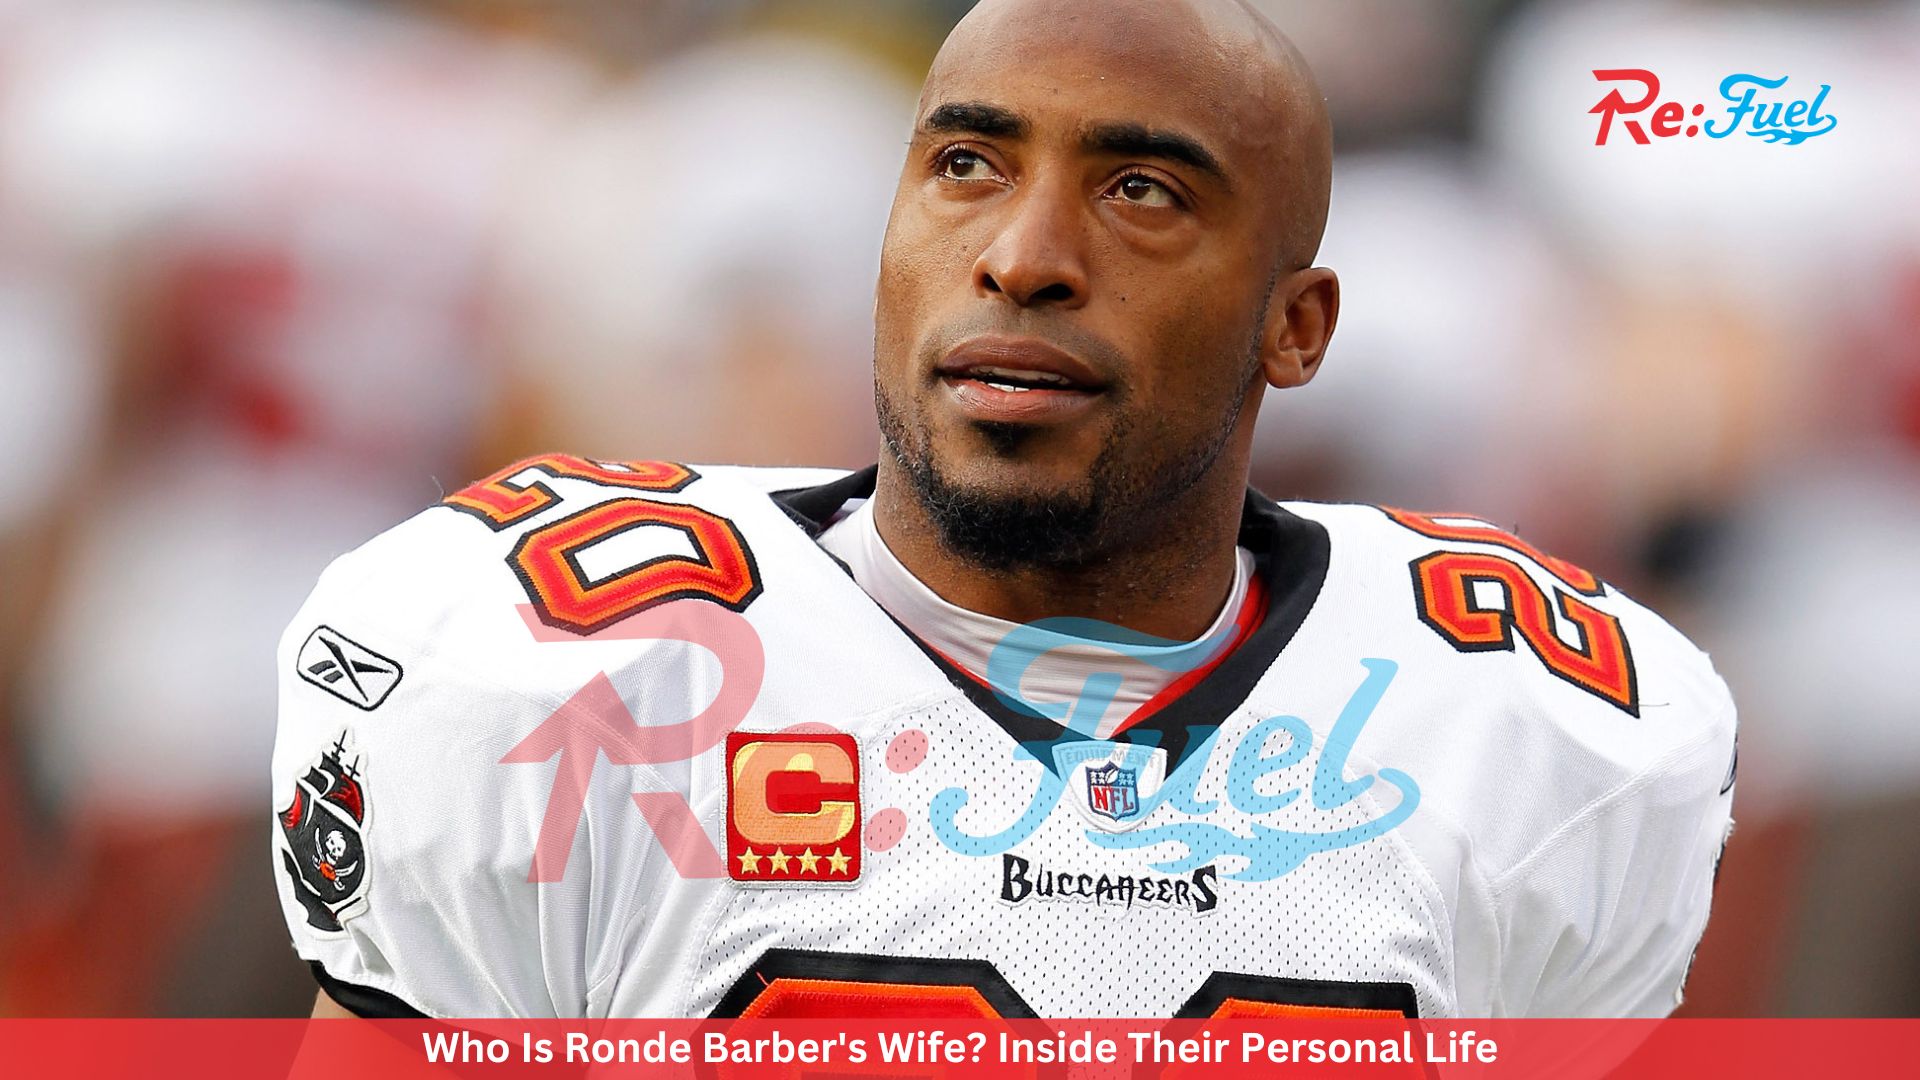 Who Is Ronde Barber's Wife? Inside Their Personal Life